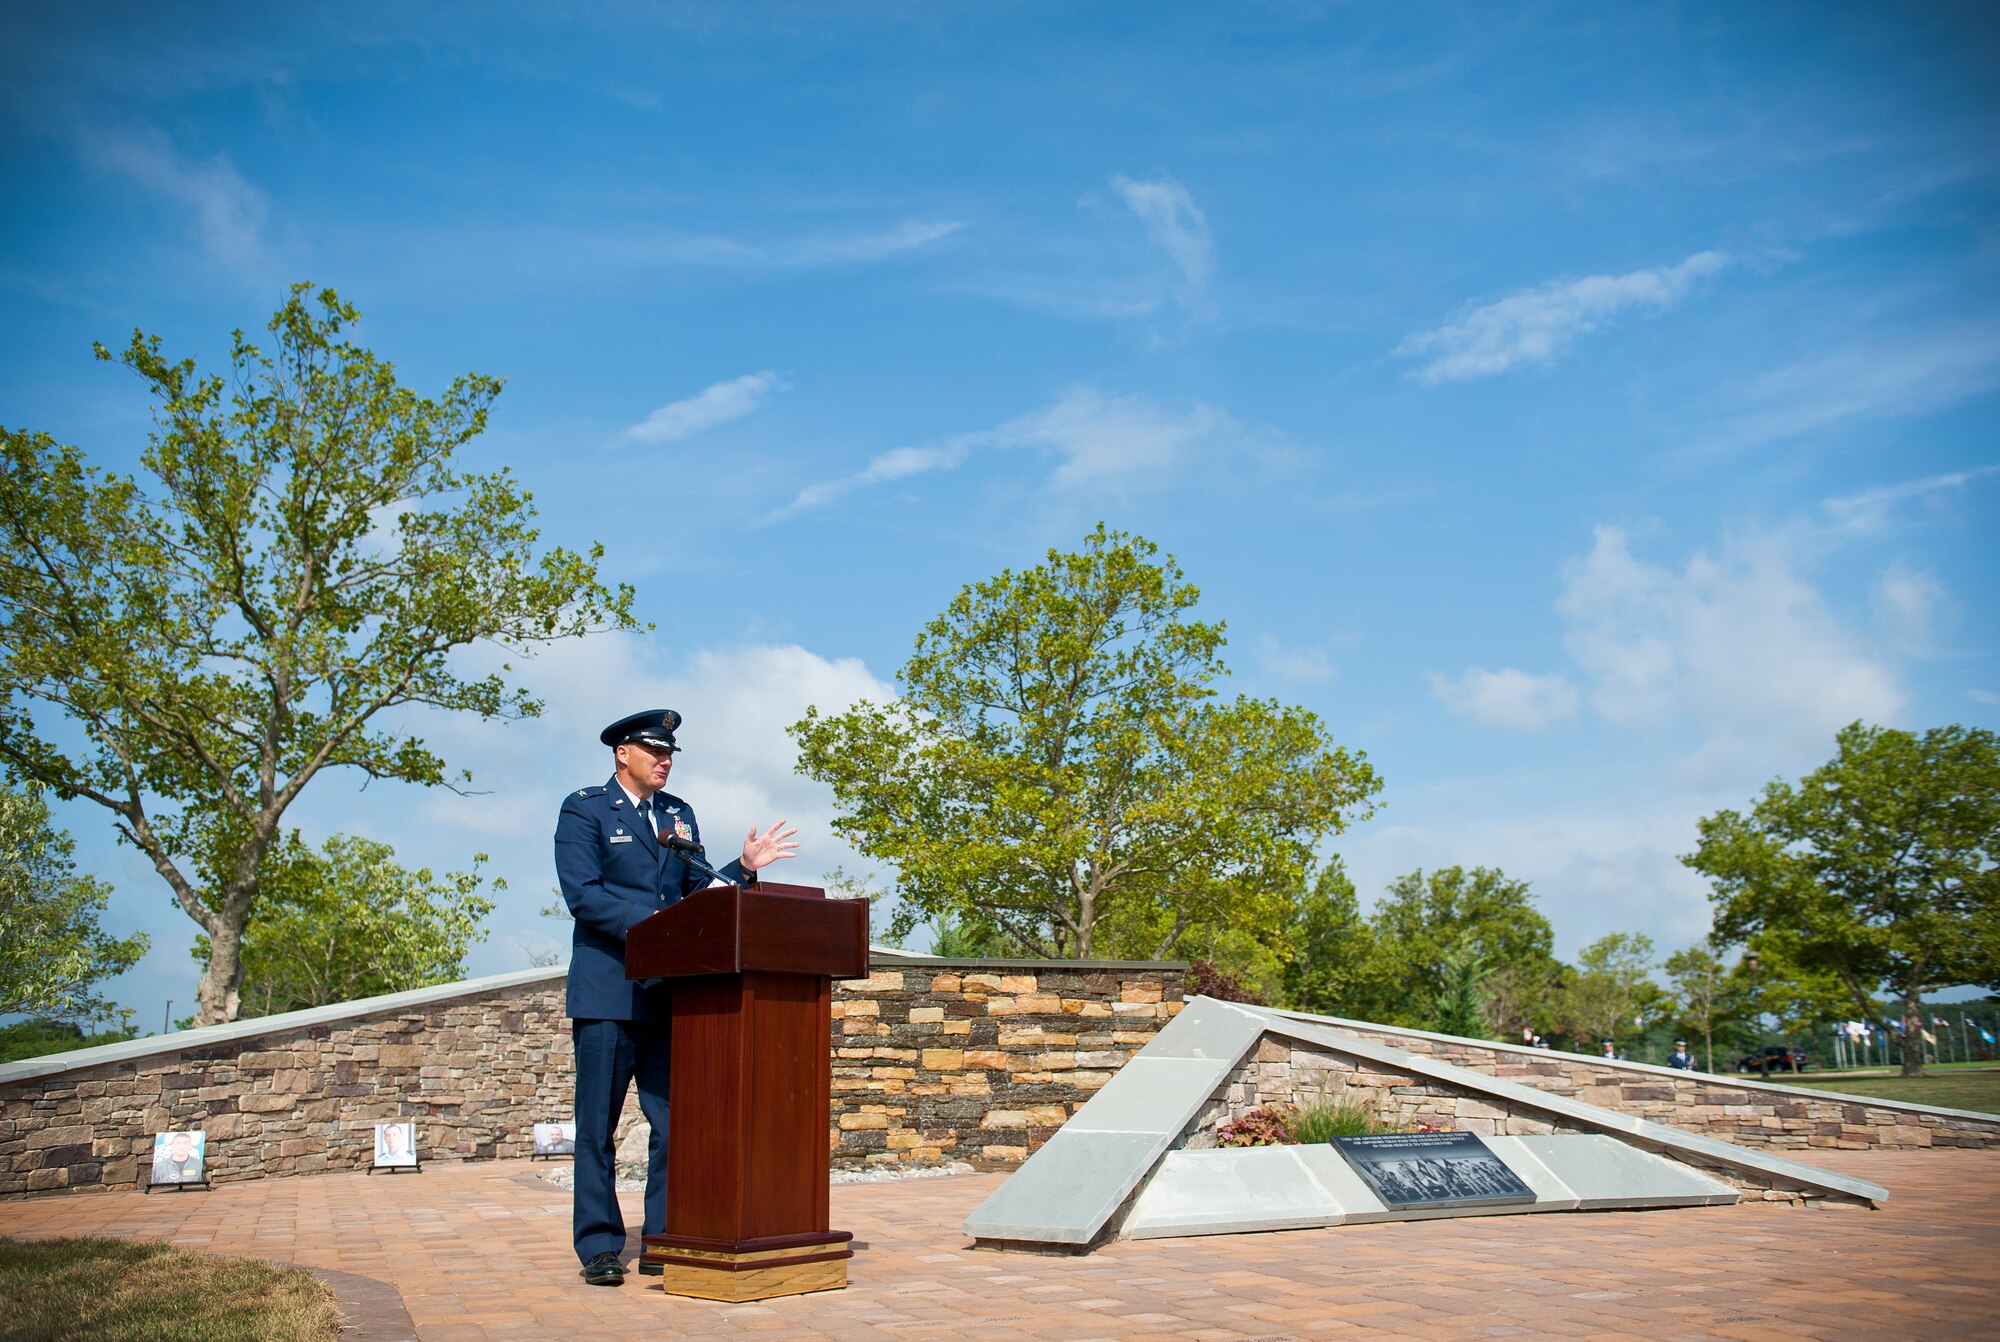 Colonel Olaf Holm, the commandant of the Air Advisory Academy, gives a
speech during the Air Advisor Memorial dedication ceremony at Joint
Base McGuire-Dix-Lakehurst, N.J., July 27, 2012. Holm was the creative
force behind the memorial project. (U.S. Air Force photo/Senior Airman
Andrew Lee)